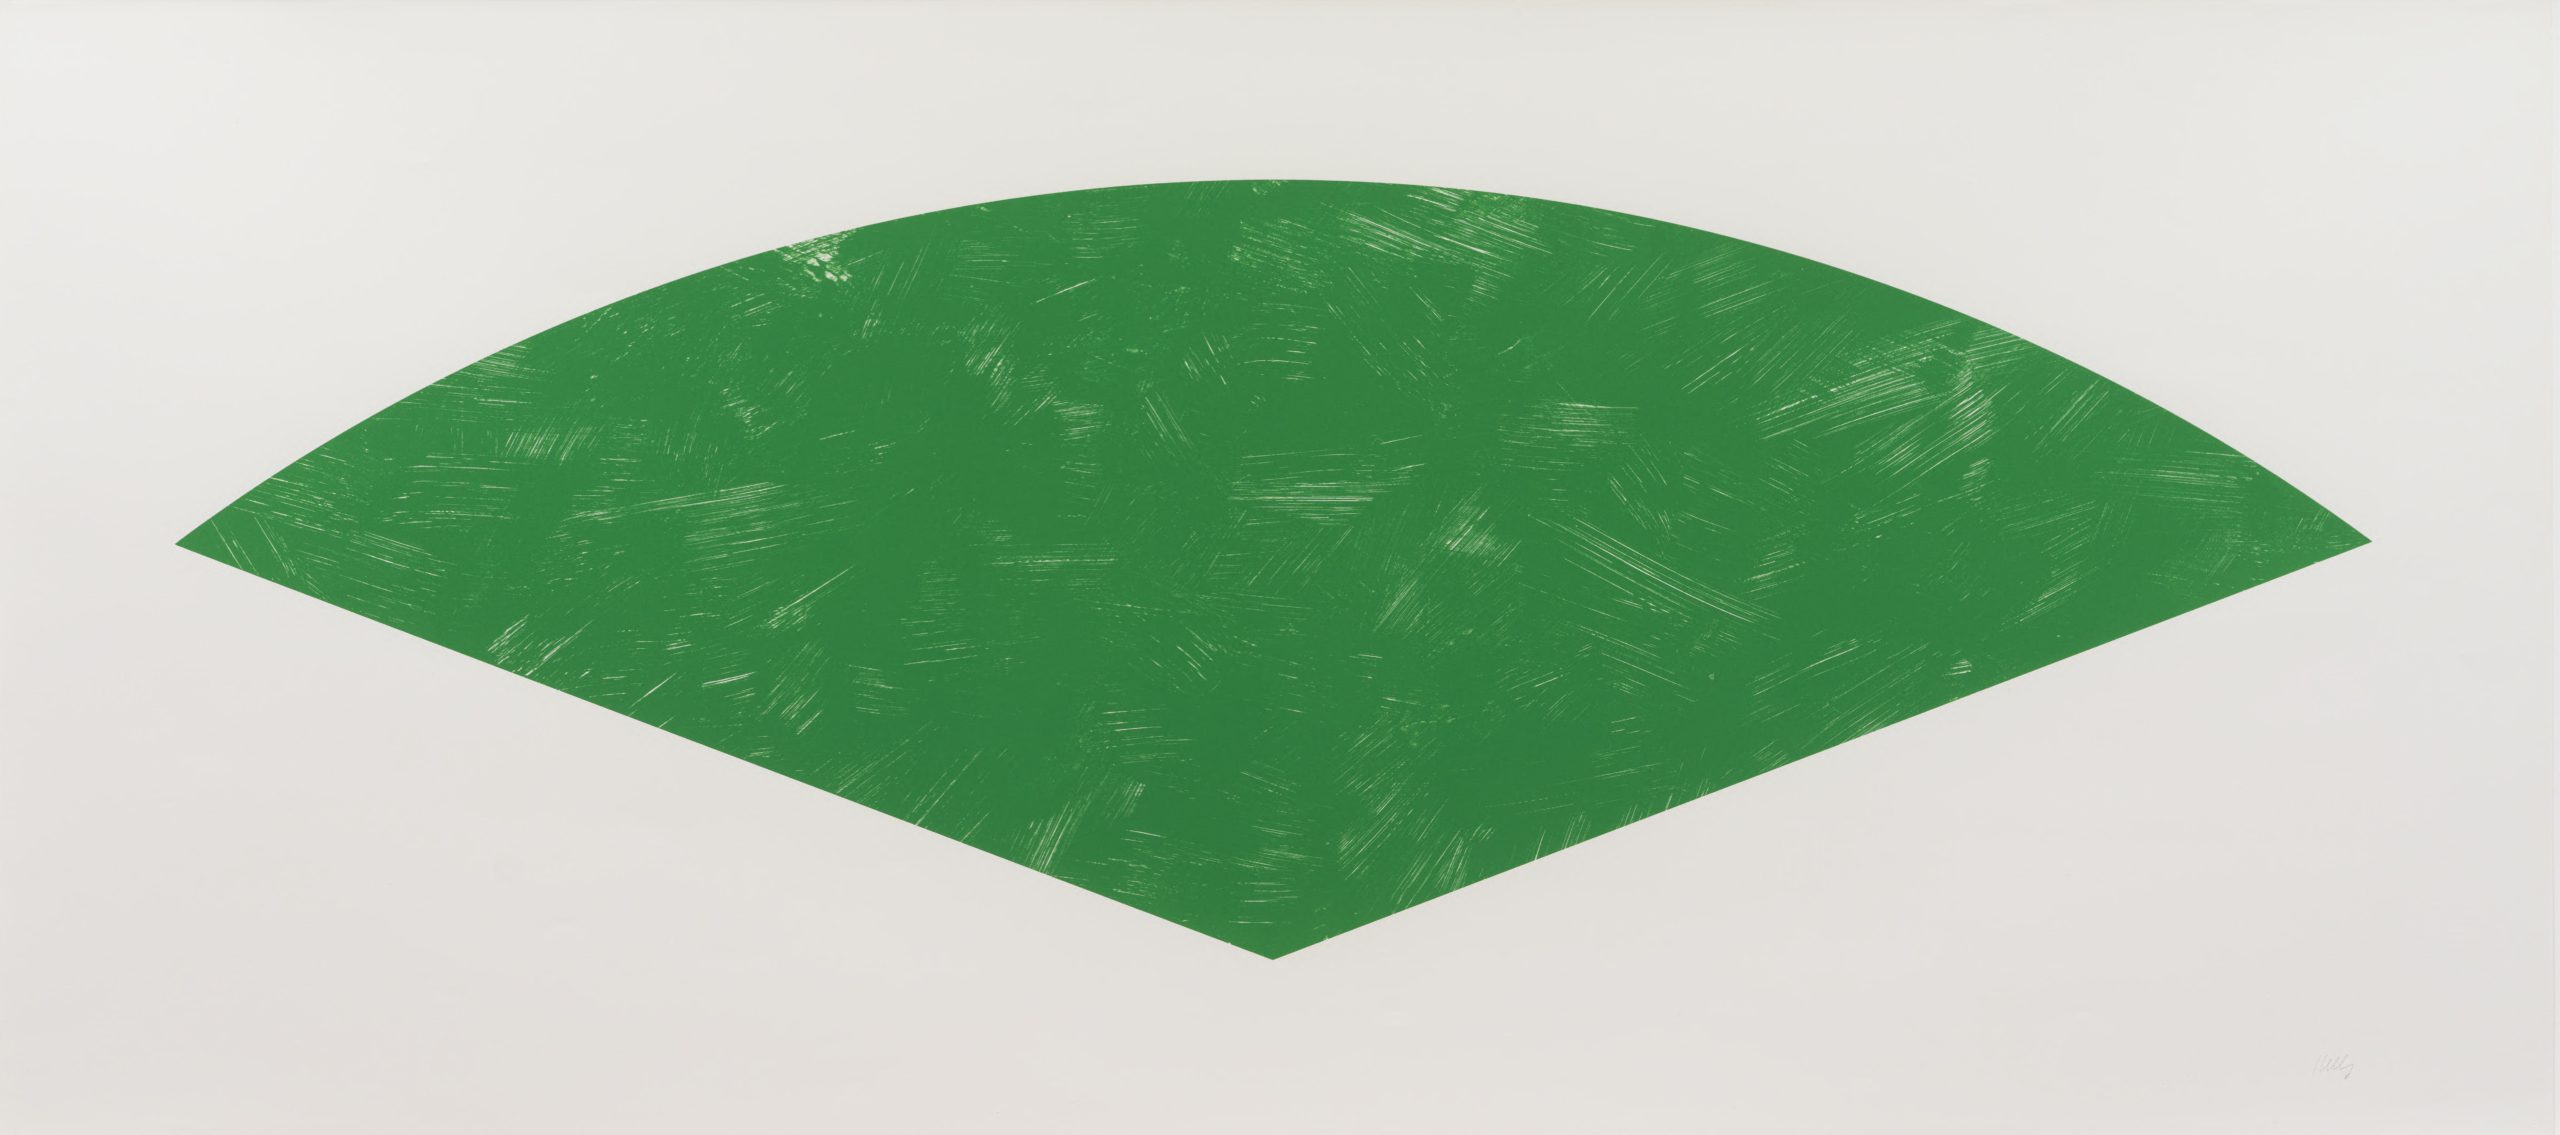 On View: Ellsworth Kelly - Green Curve (State I)